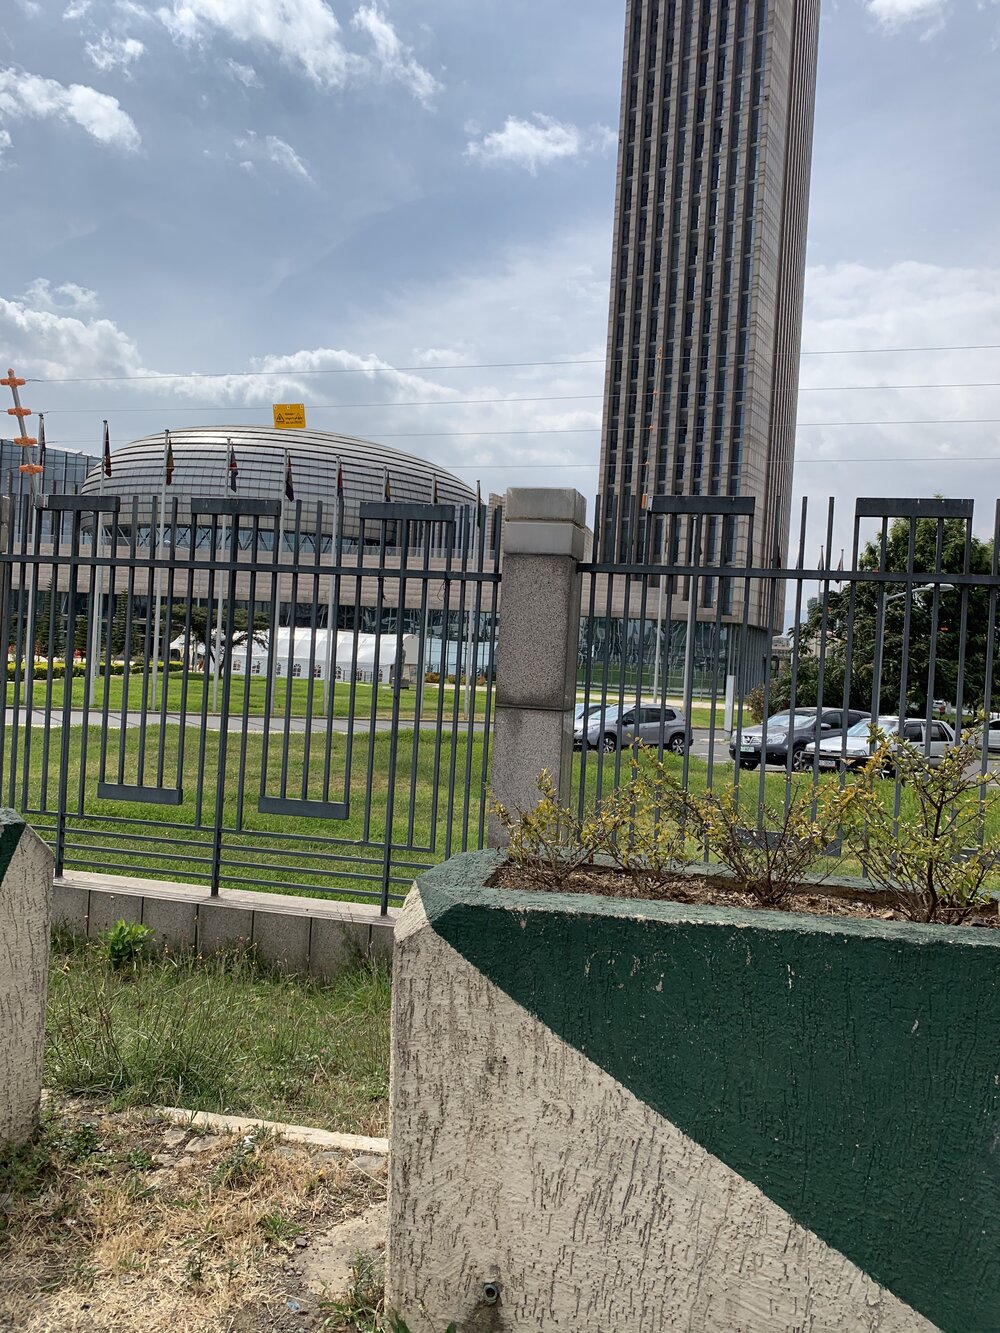 The AU central assembly building, as viewed through the fencing.